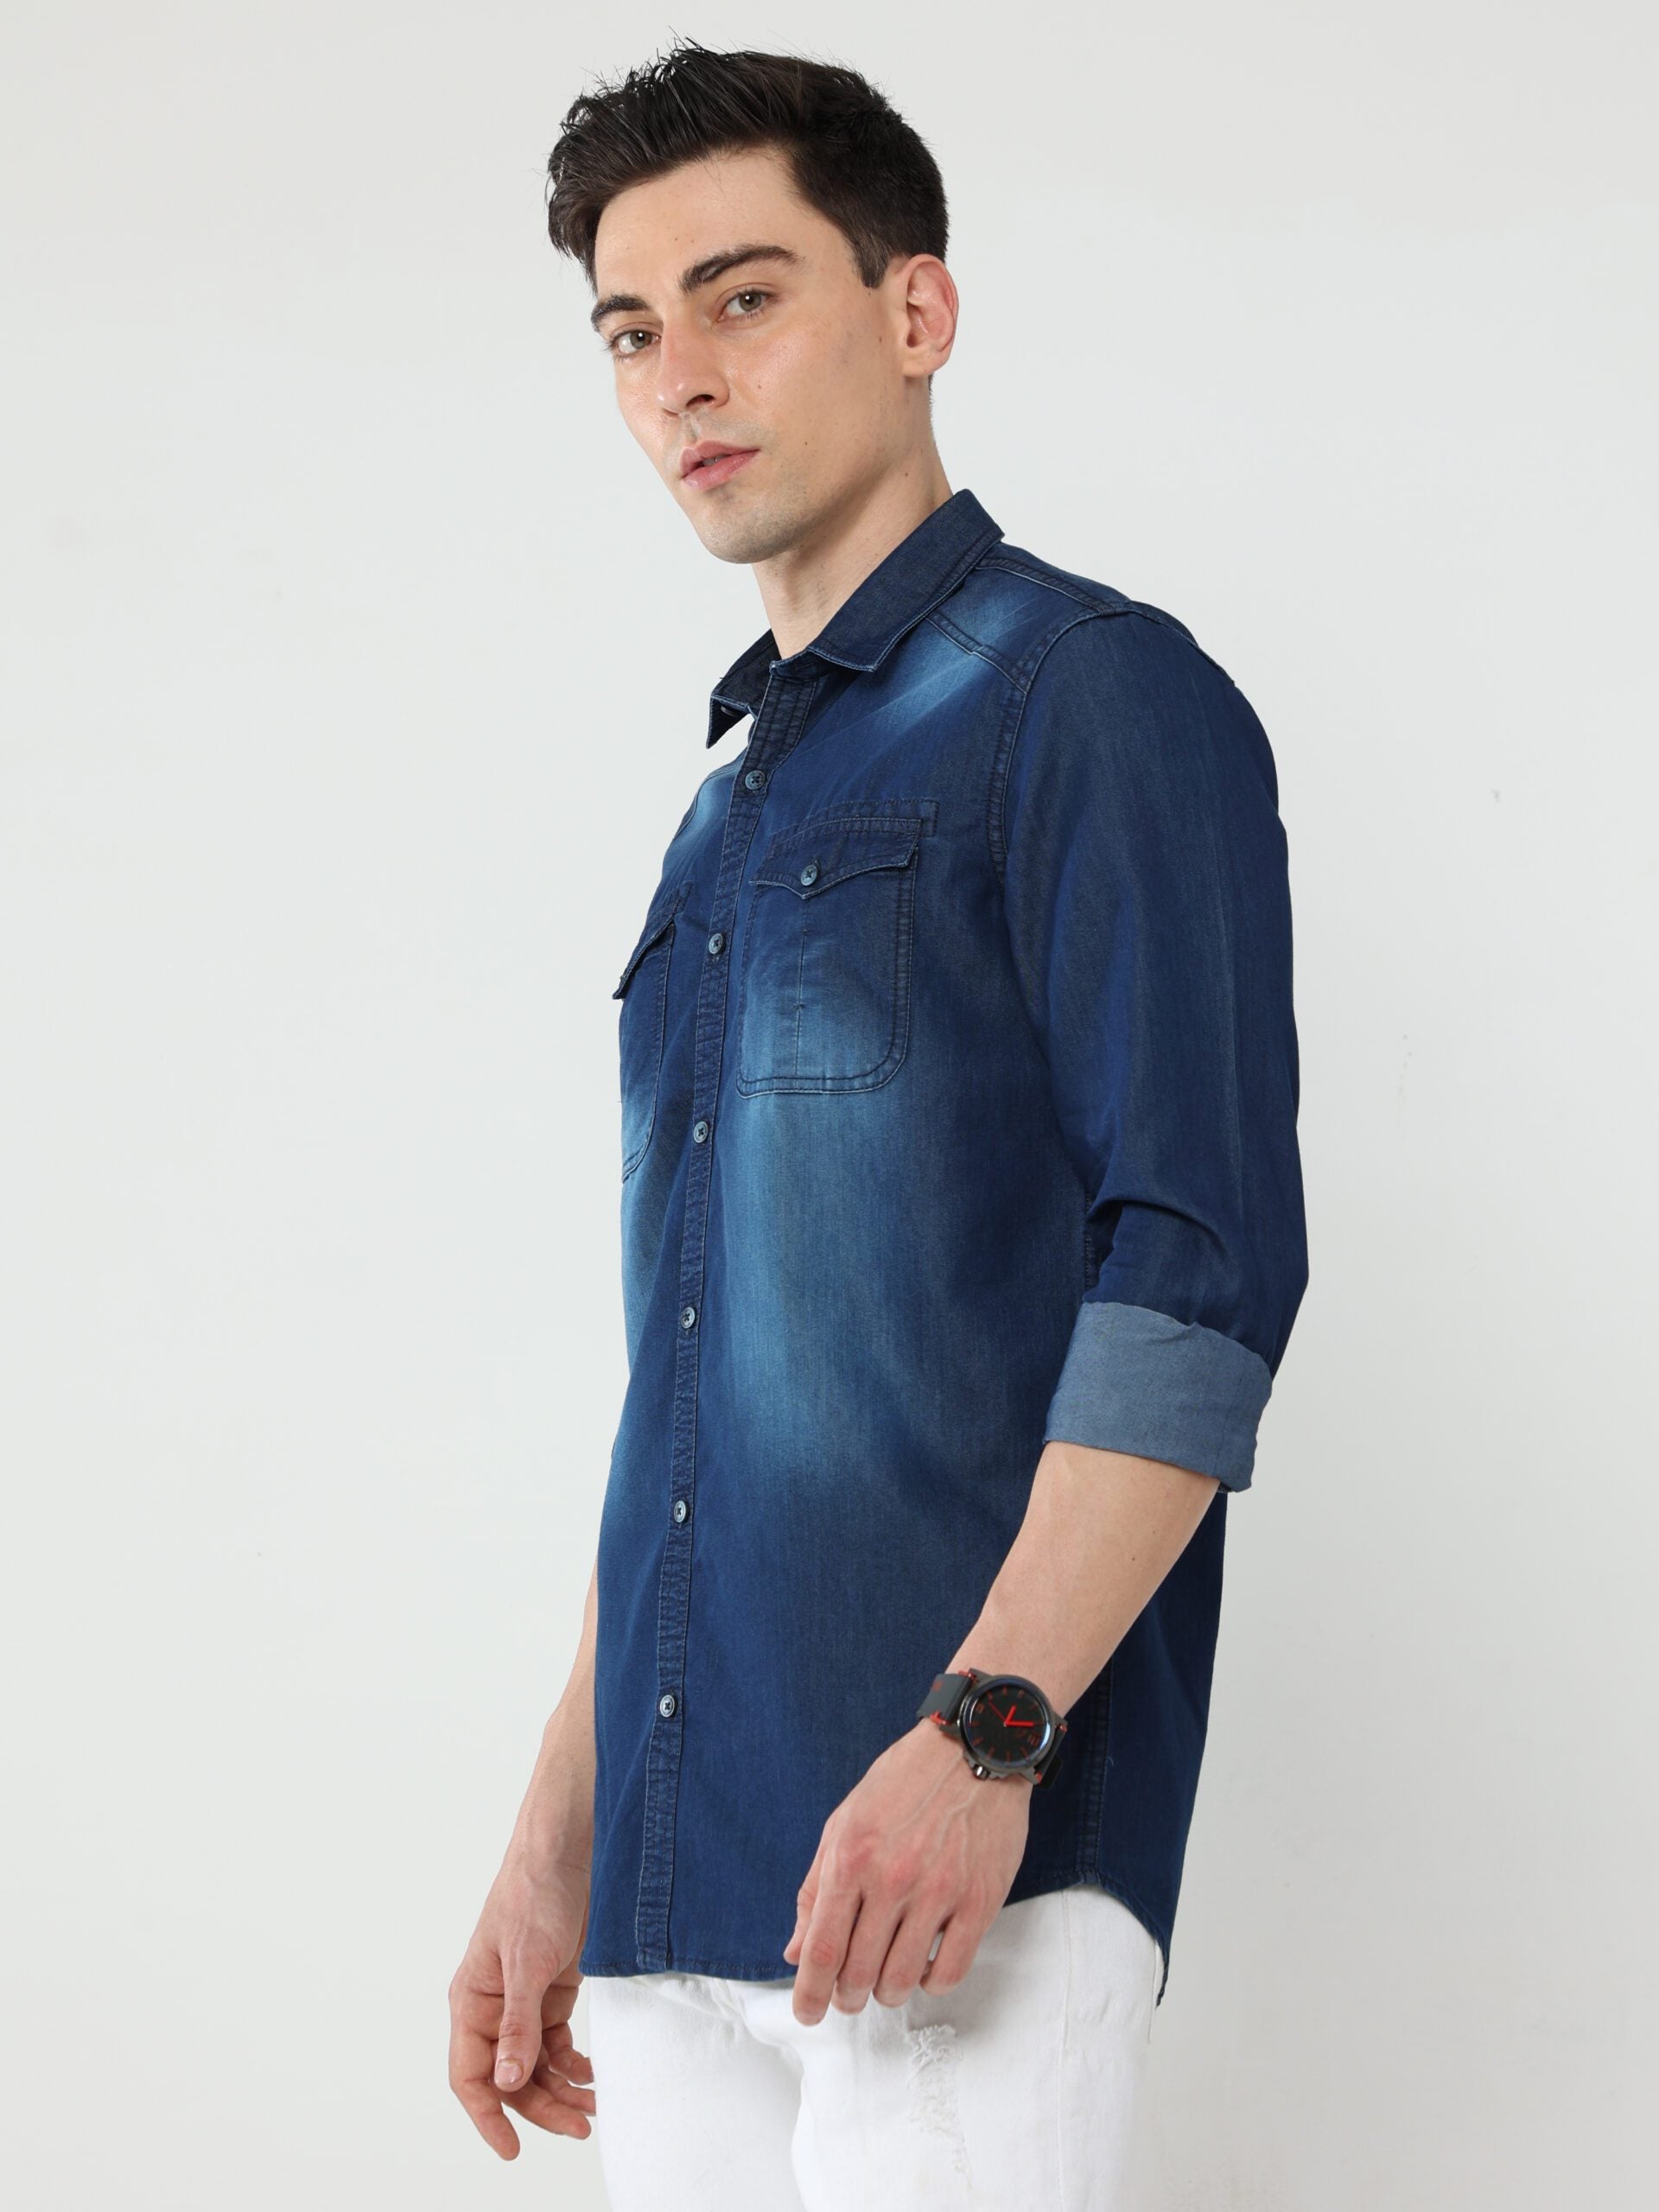 How To Wear A Denim Shirt – Men's Outfits & Style Tips